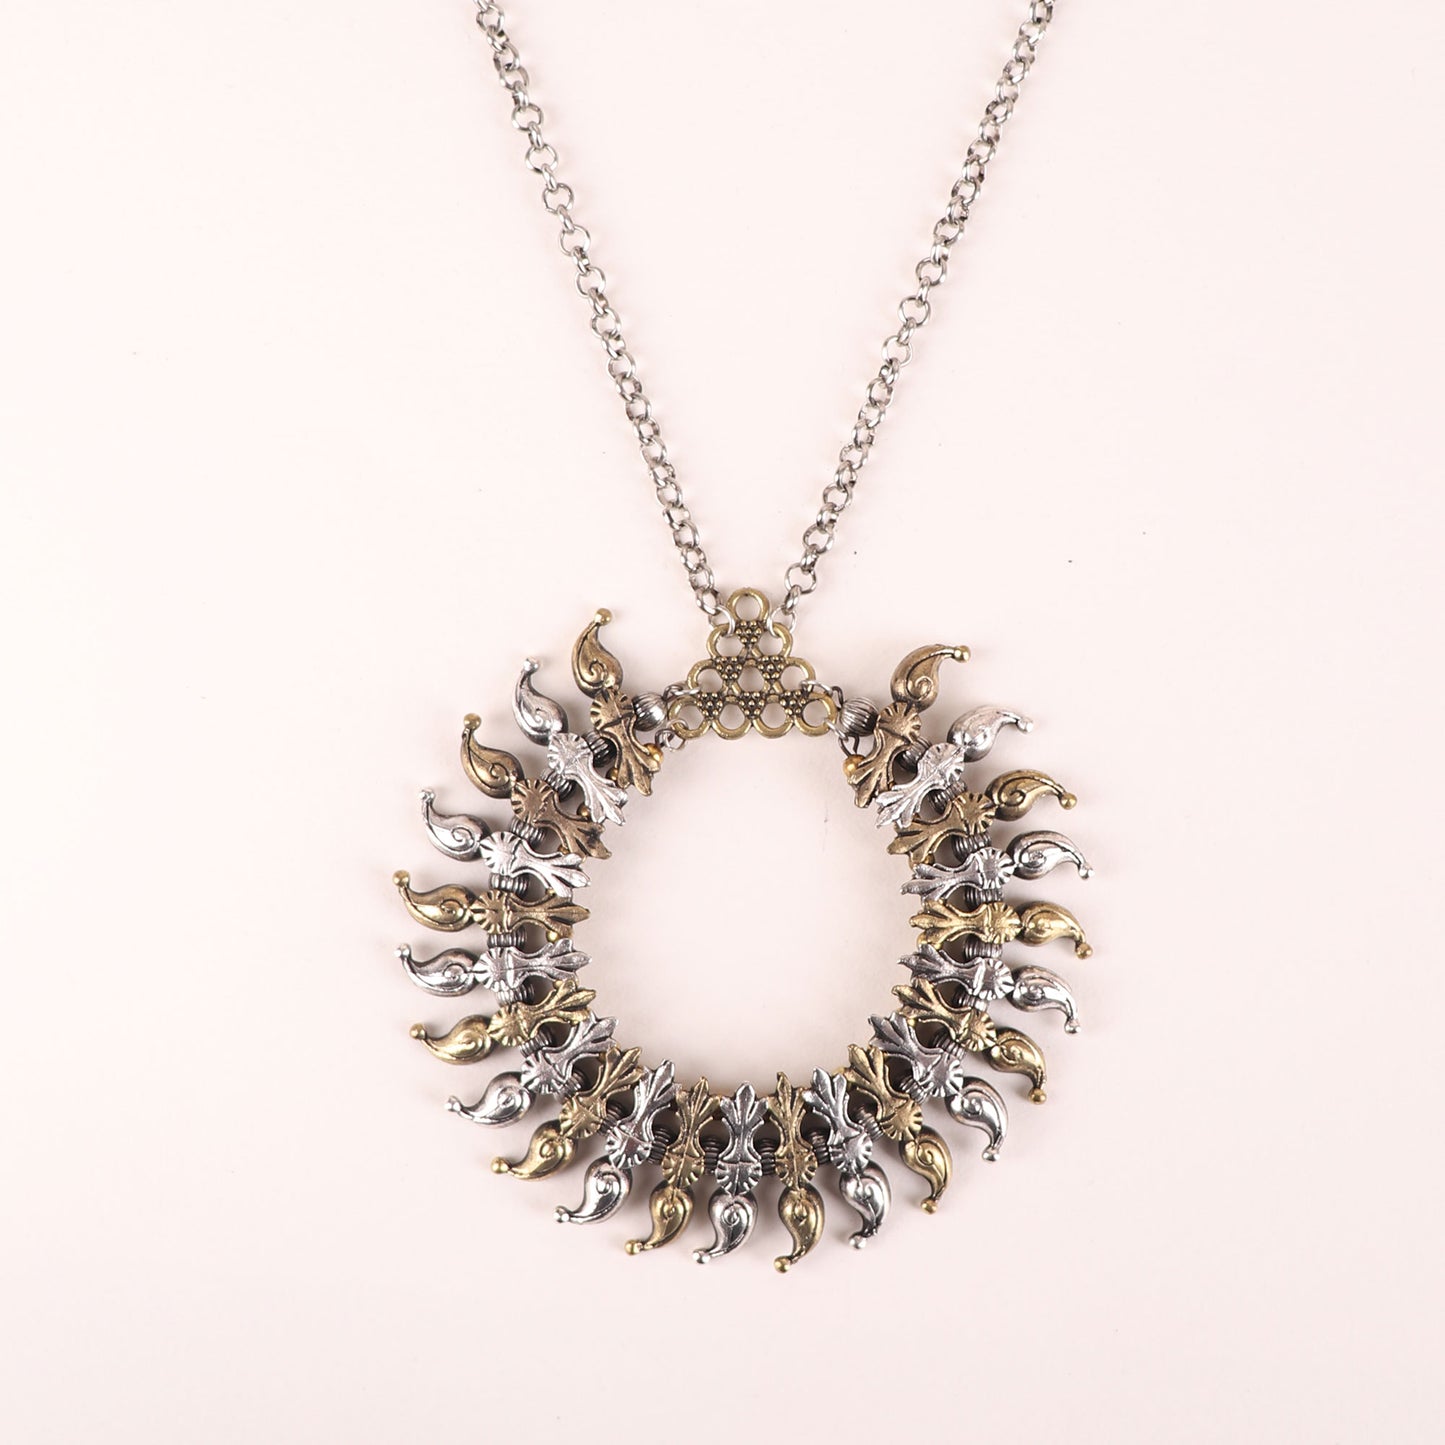 Necklace,The Oktaria Circle Necklace in Dual Tone - Cippele Multi Store